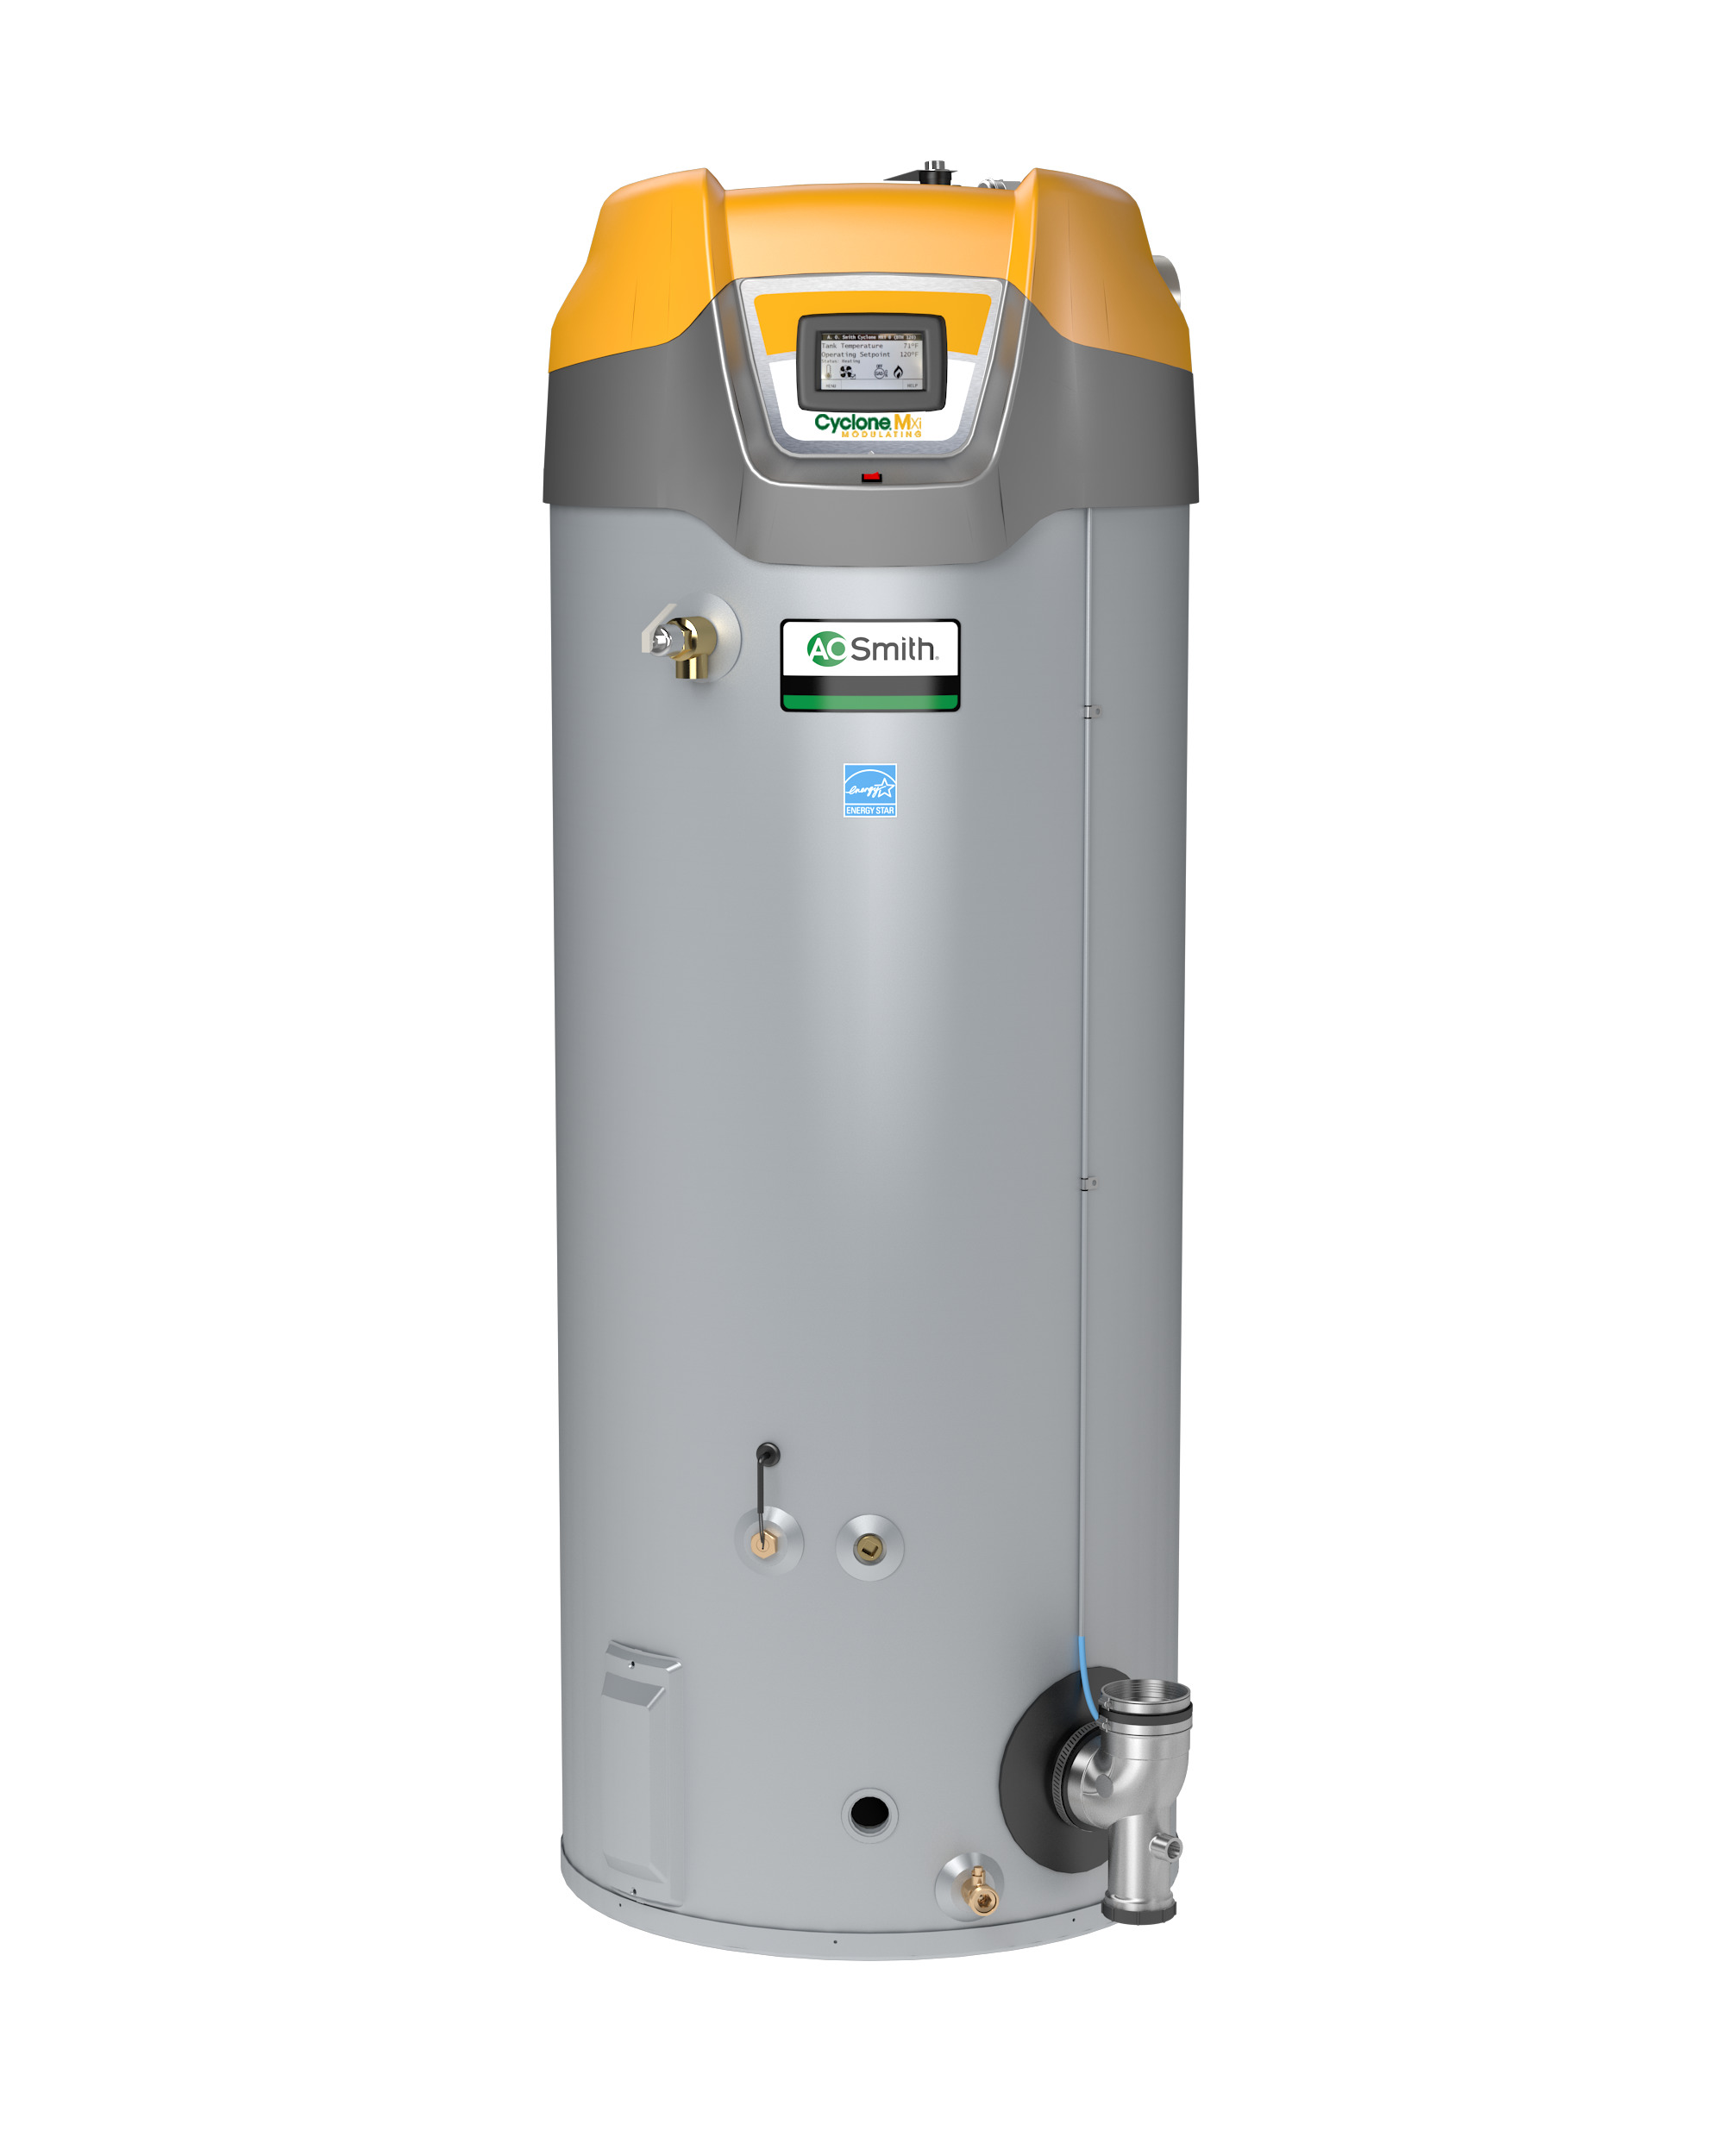 AO SMITH BTH-199A: 100 GALLON, 199,000 BTU, ASME, 3" VENT, UP TO 97% THERMAL EFFICIENCY, NATURAL GAS, CYCLONE Mxi MODULATING COMMERCIAL GAS WATER HEATER